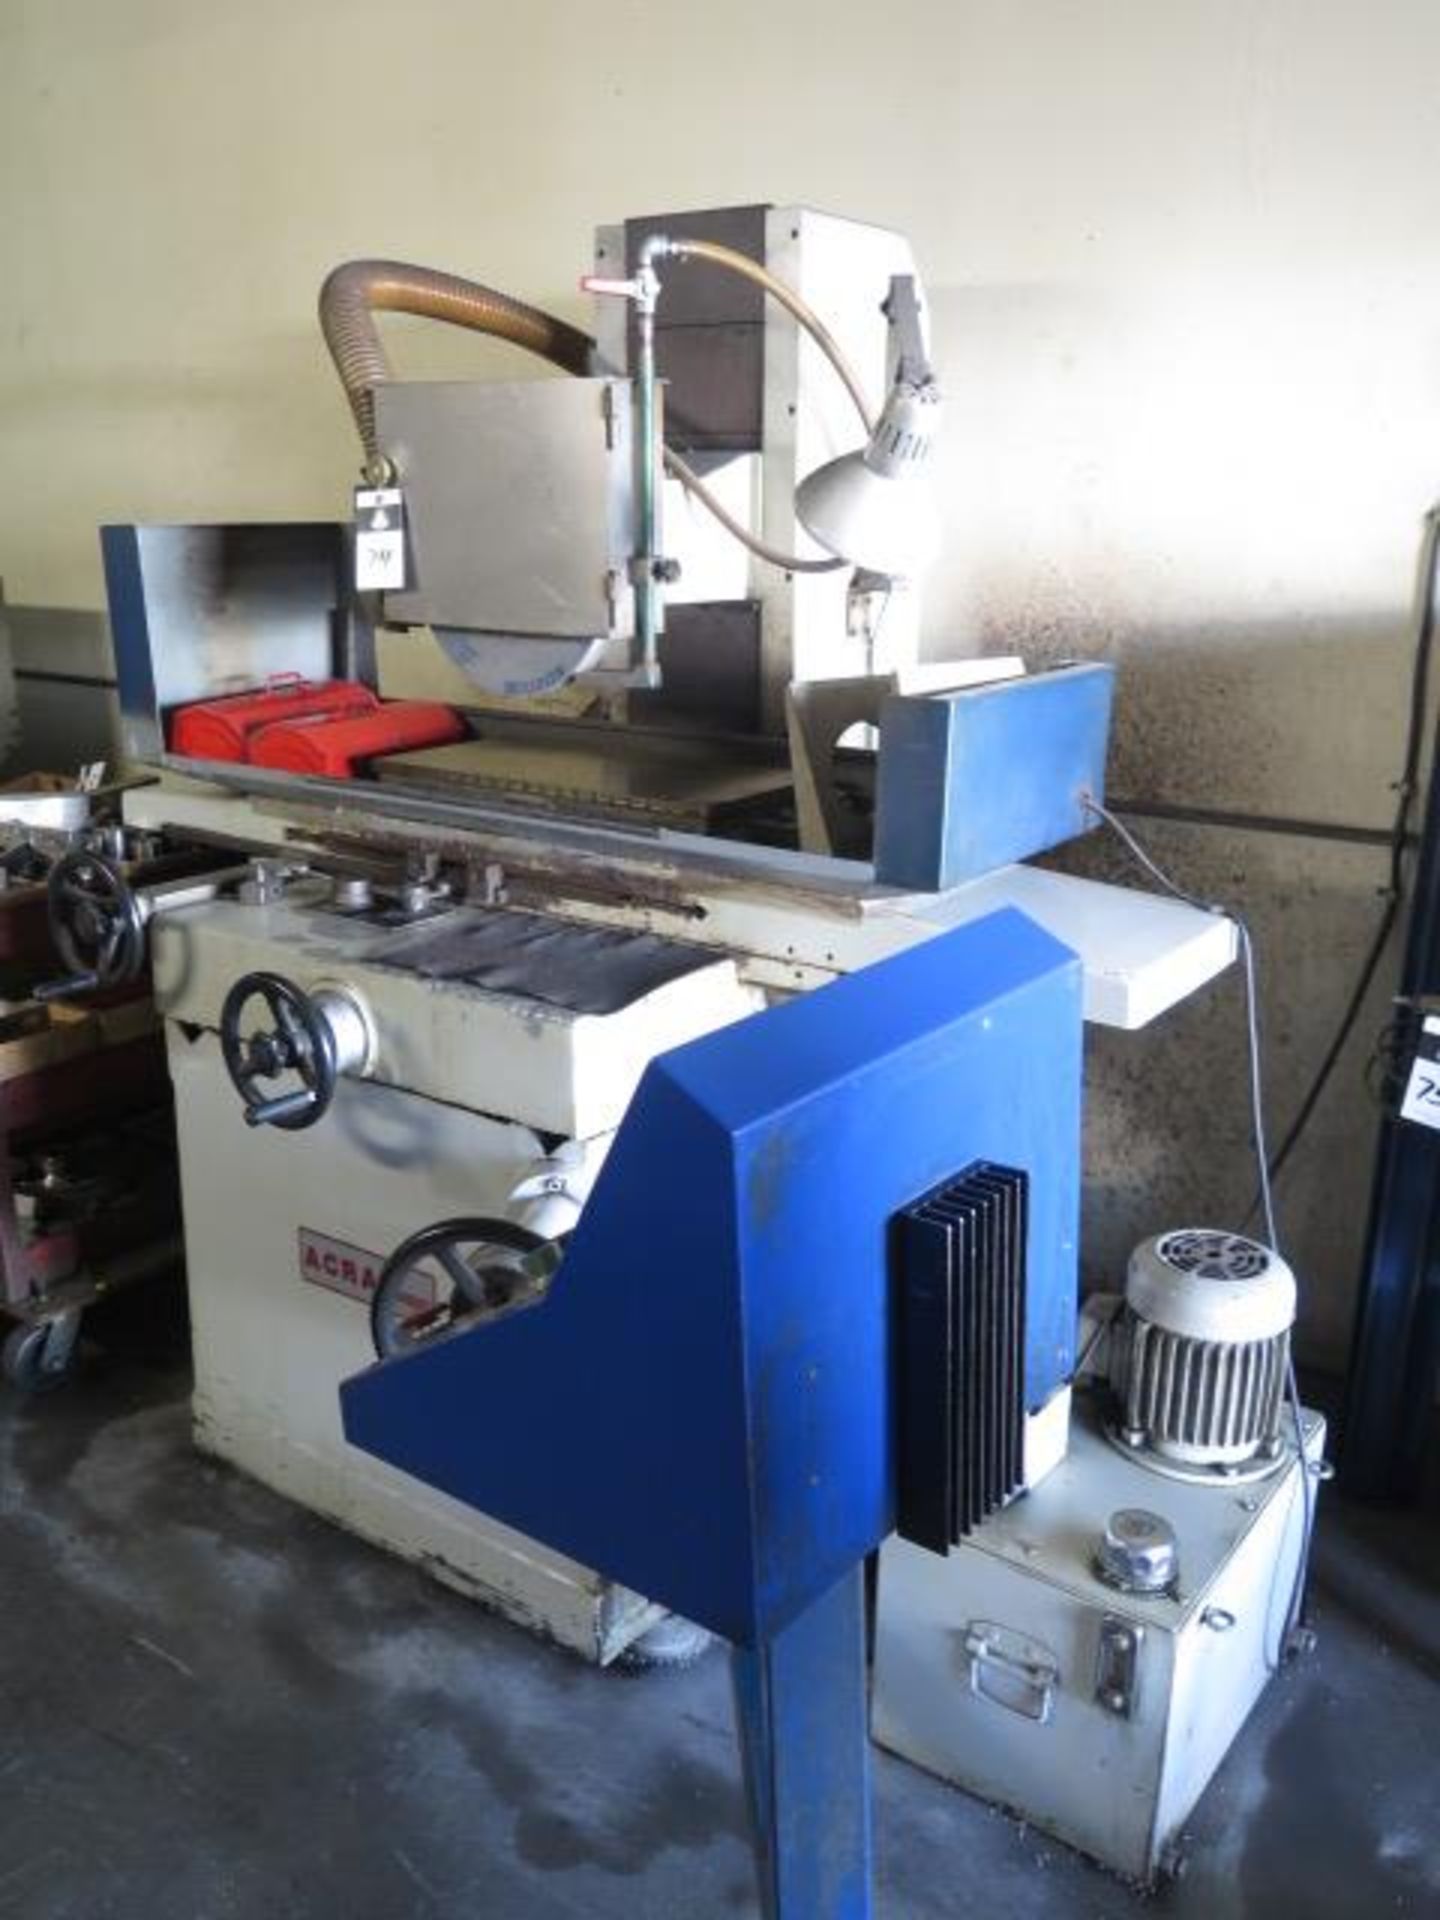 Acra ASG-1224HS 12” x 24” Auto Hydraulic Surface Grinder s/n 97125011 w/ Acra Controls, SOLD AS IS - Image 2 of 15